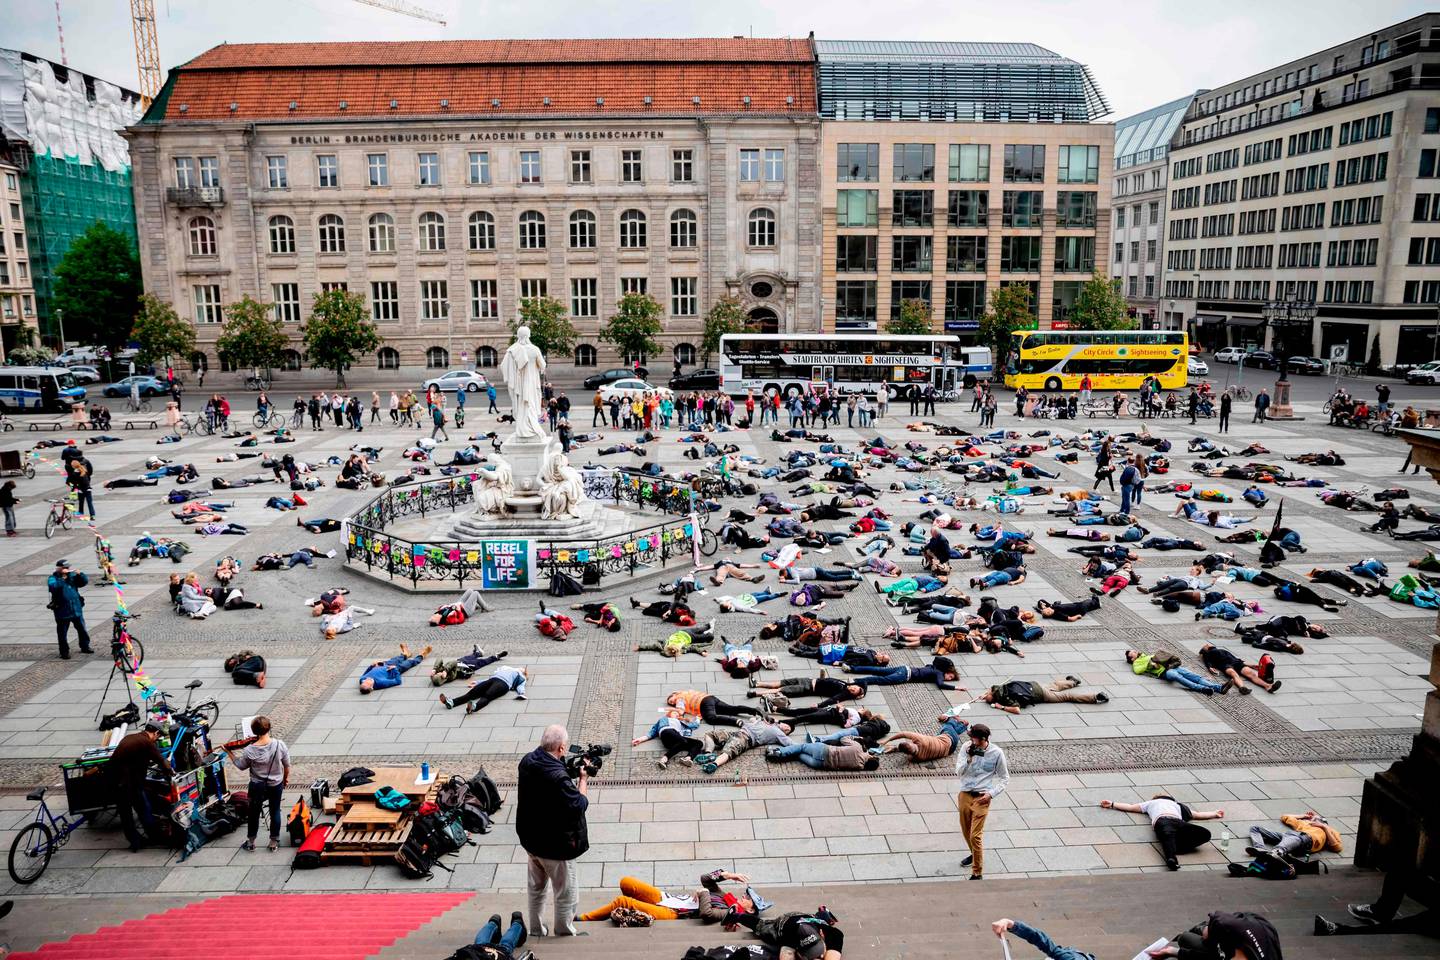 Extinction Rebellion (XR) climate change activists lie on the floor to symbolize a "mass die" at the Gendarmenmarkt square in Berlin on April 27, 2019. - Extinction Rebellion (XR) is an international movement that uses non-violent civil disobedience to achieve radical change in order to minimize the risk of human extinction and ecological collapse. (Photo by Christoph Soeder / dpa / AFP) / Germany OUT